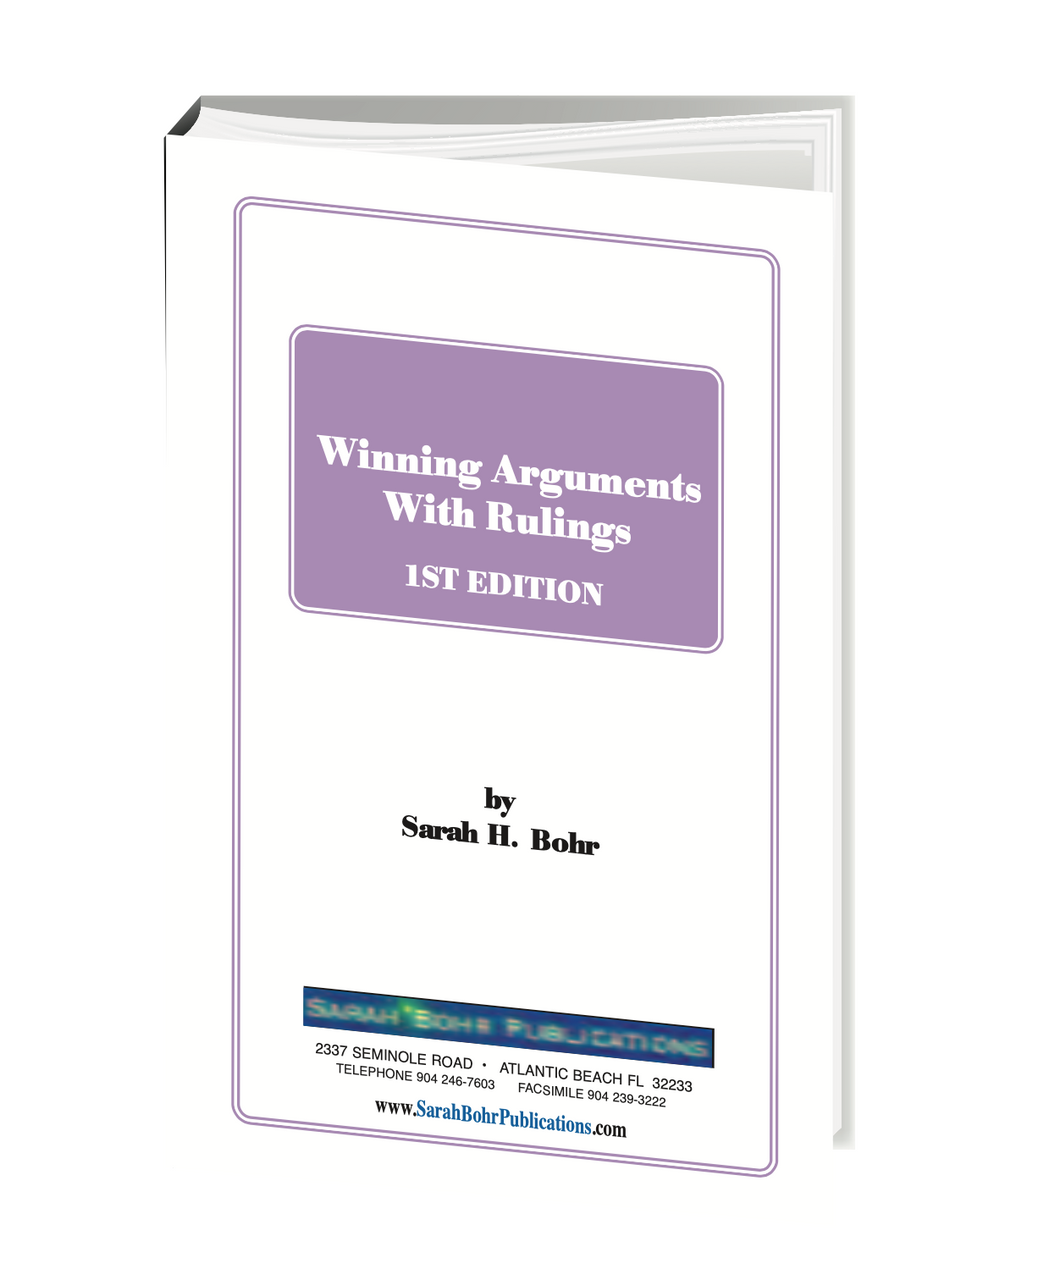 Winning Arguments with Rulings - 1st Edition (Digital Download + Physical Book)